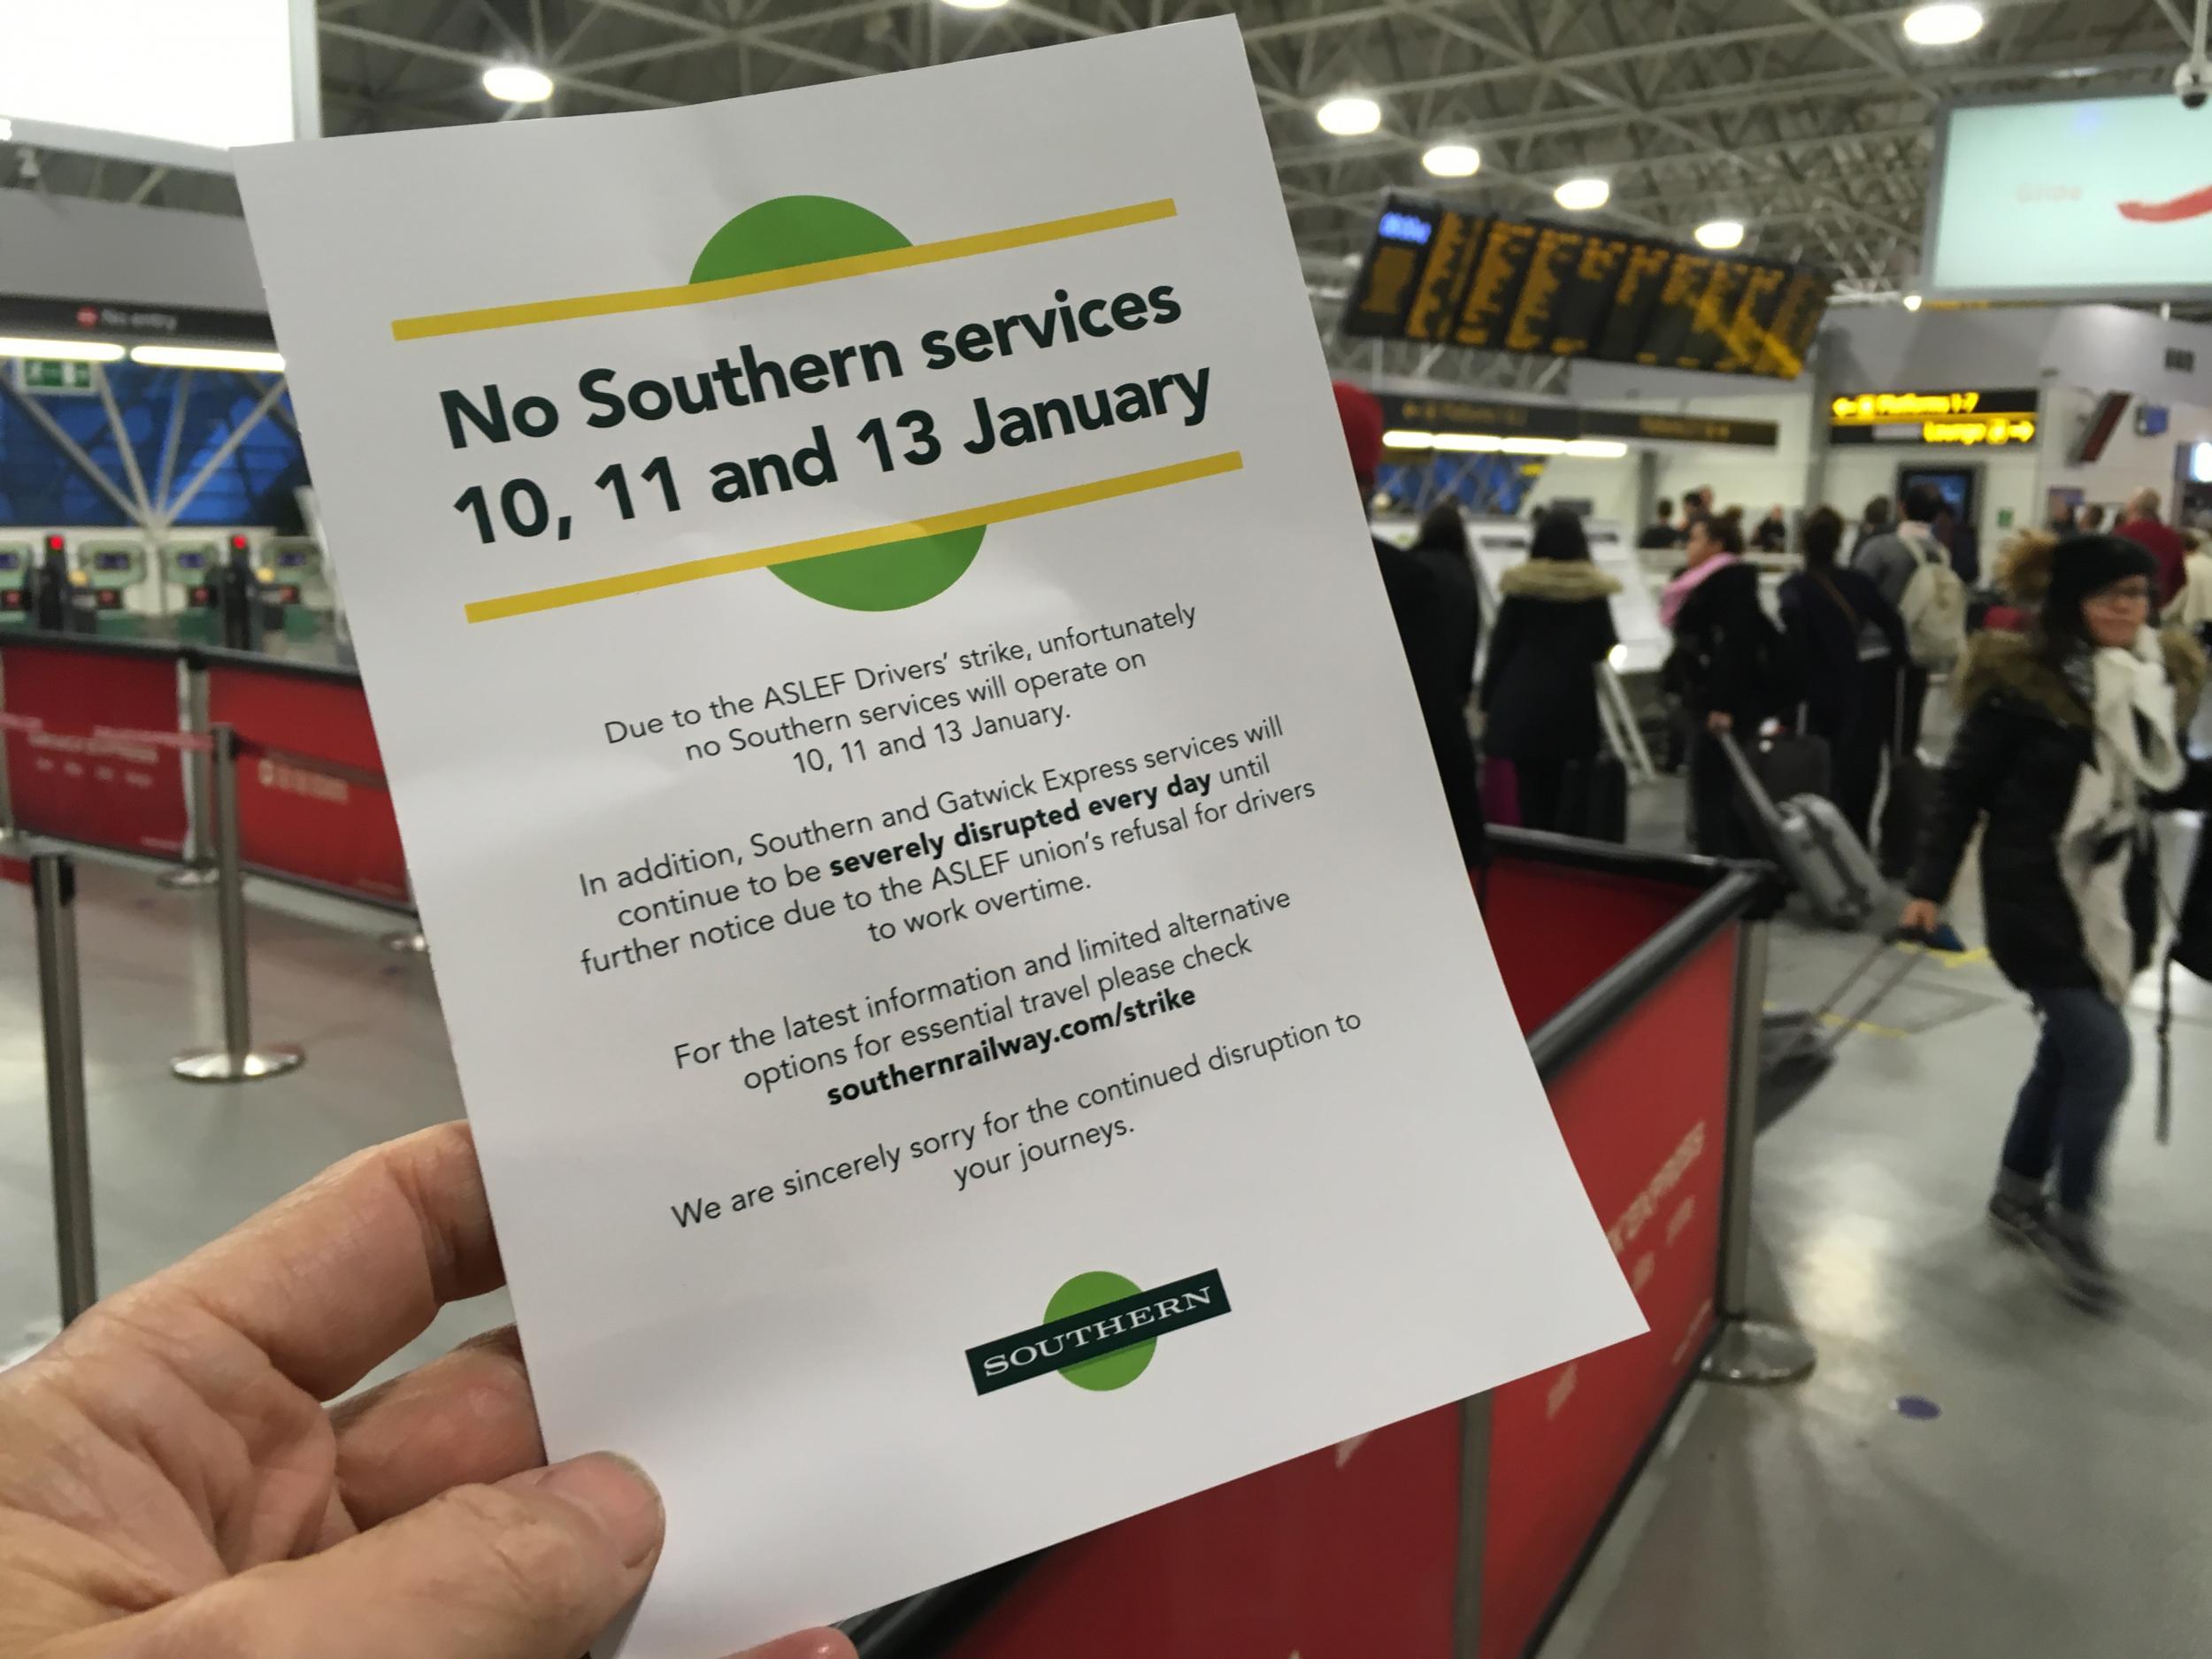 Train pain: leaflets handed out by Southern Rail staff at Gatwick airport